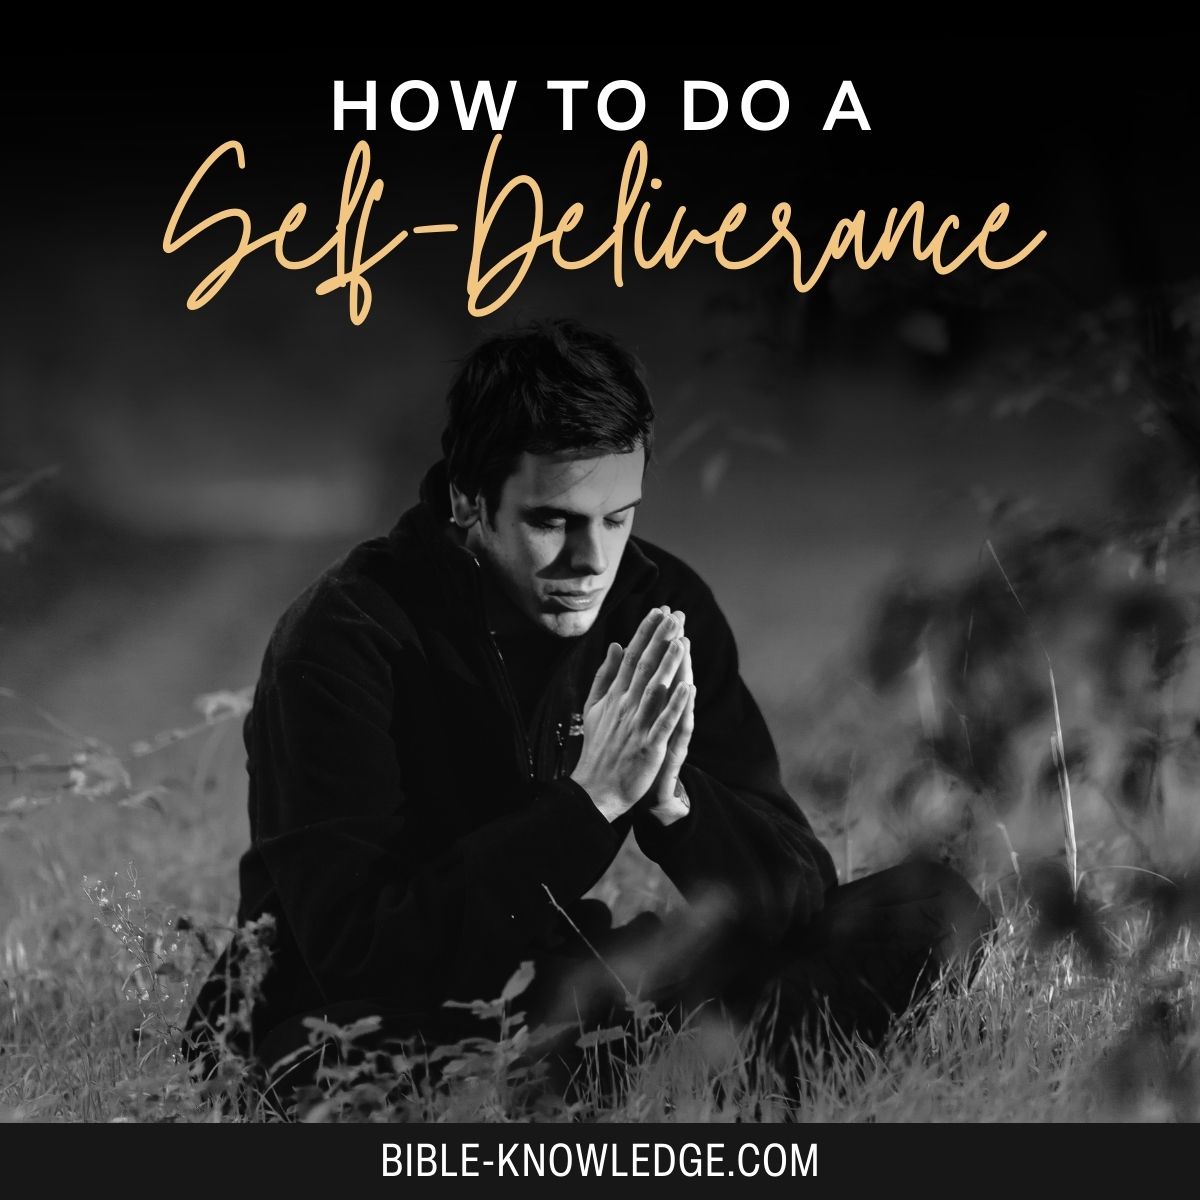 How To Do a Self-Deliverance